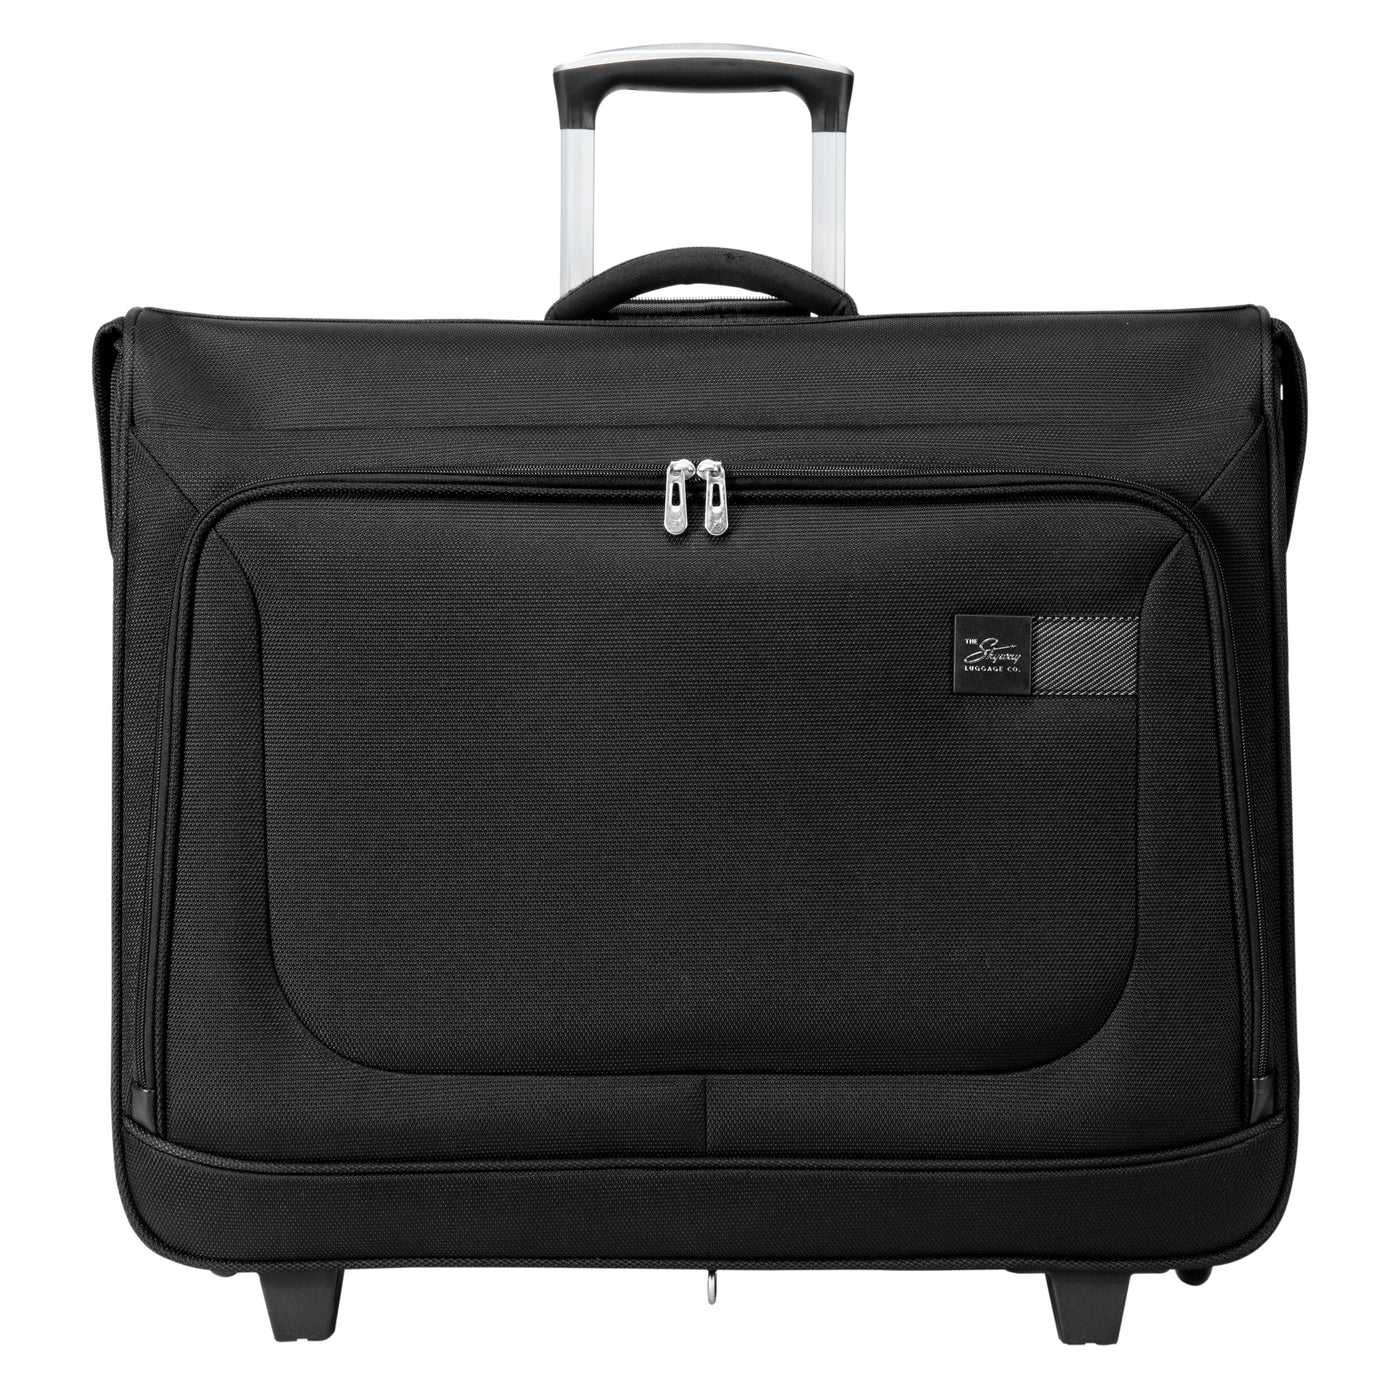 Gpmsign Travel Bag, Gpmsign Travel Bag with Shoe Compartment, High-capacity  Double-layer Wet Separation Travelling Bag